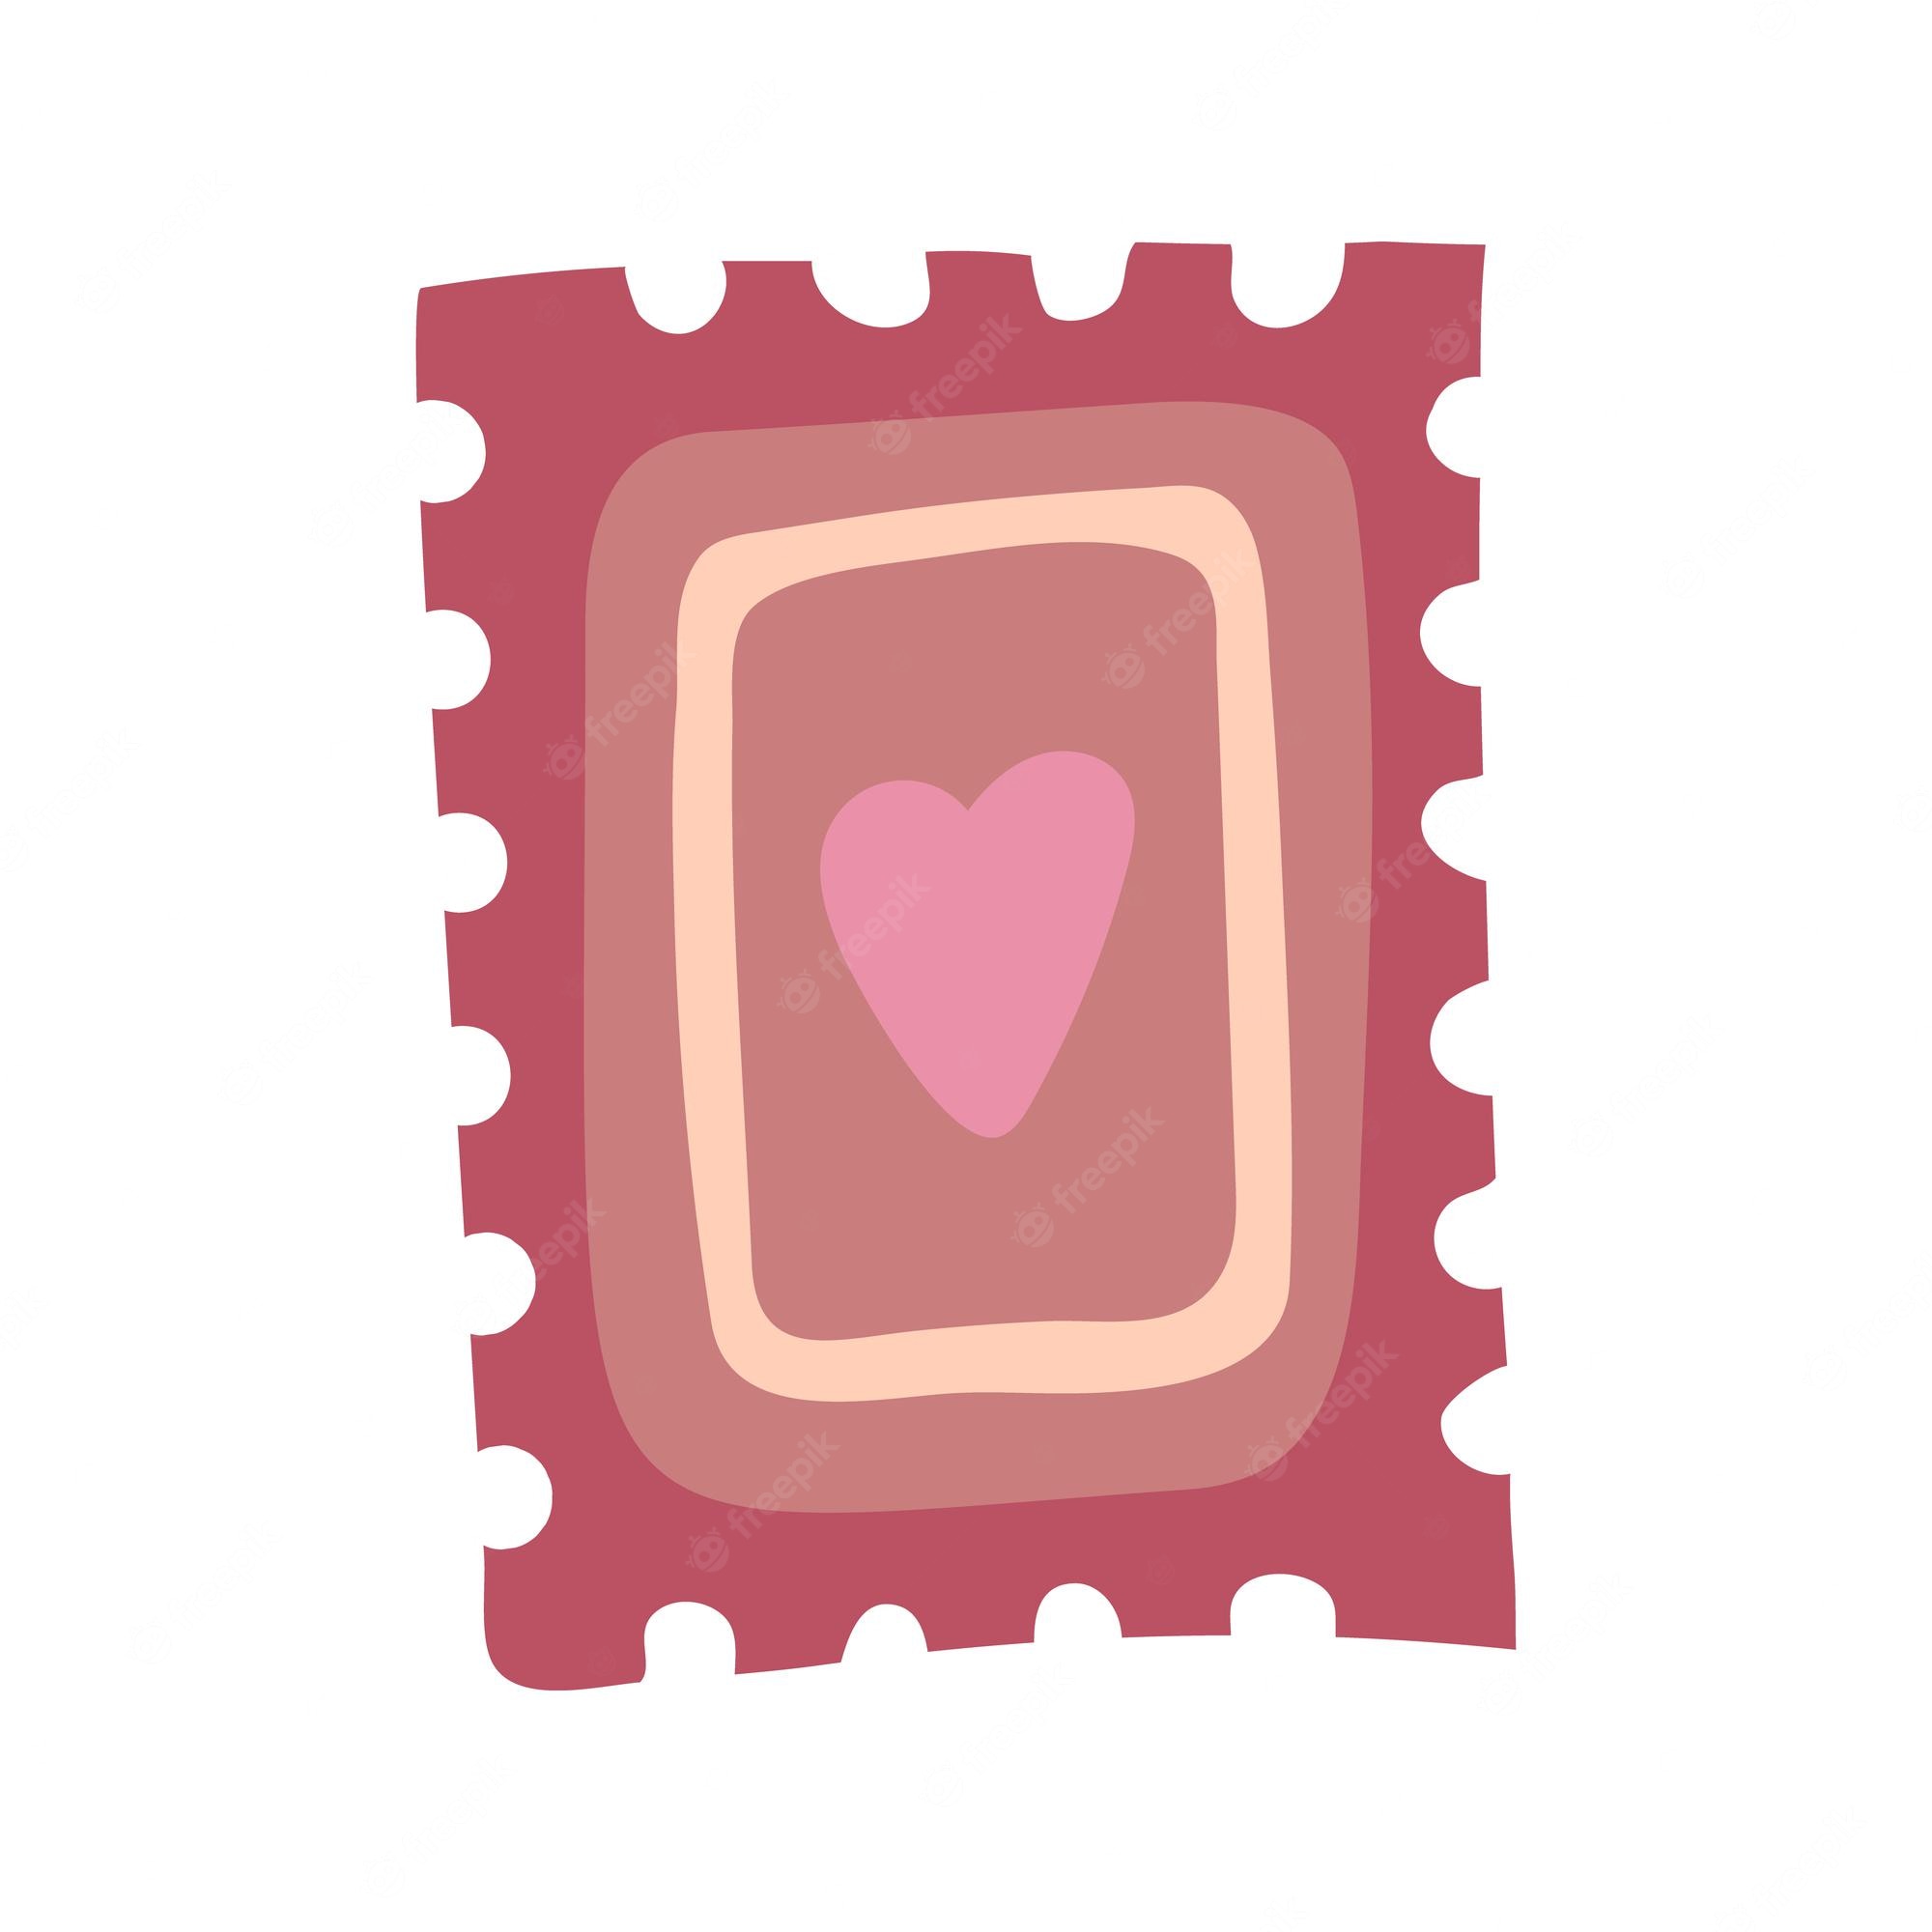 Heart Stamp Cliparts, Stock Vector and Royalty Free Heart Stamp  Illustrations